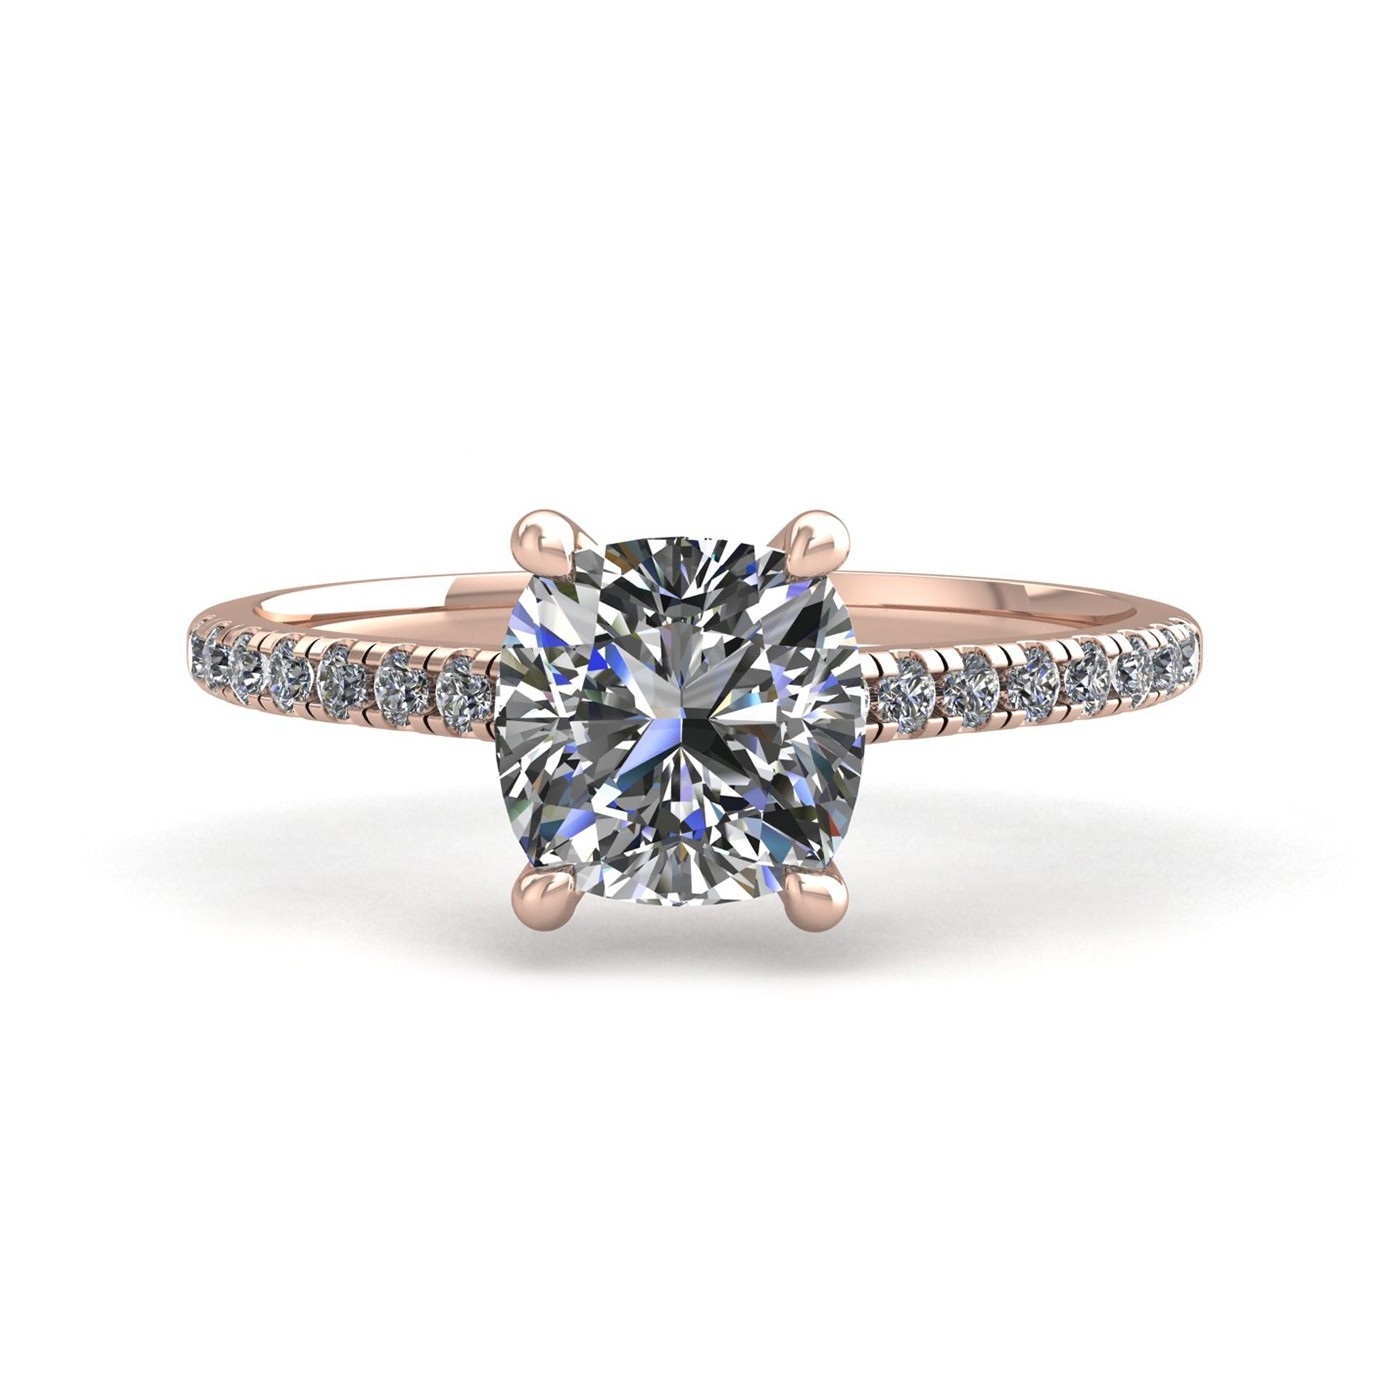 18k rose gold 1.5ct 4 prongs cushion cut diamond engagement ring with whisper thin pavÉ set band Photos & images